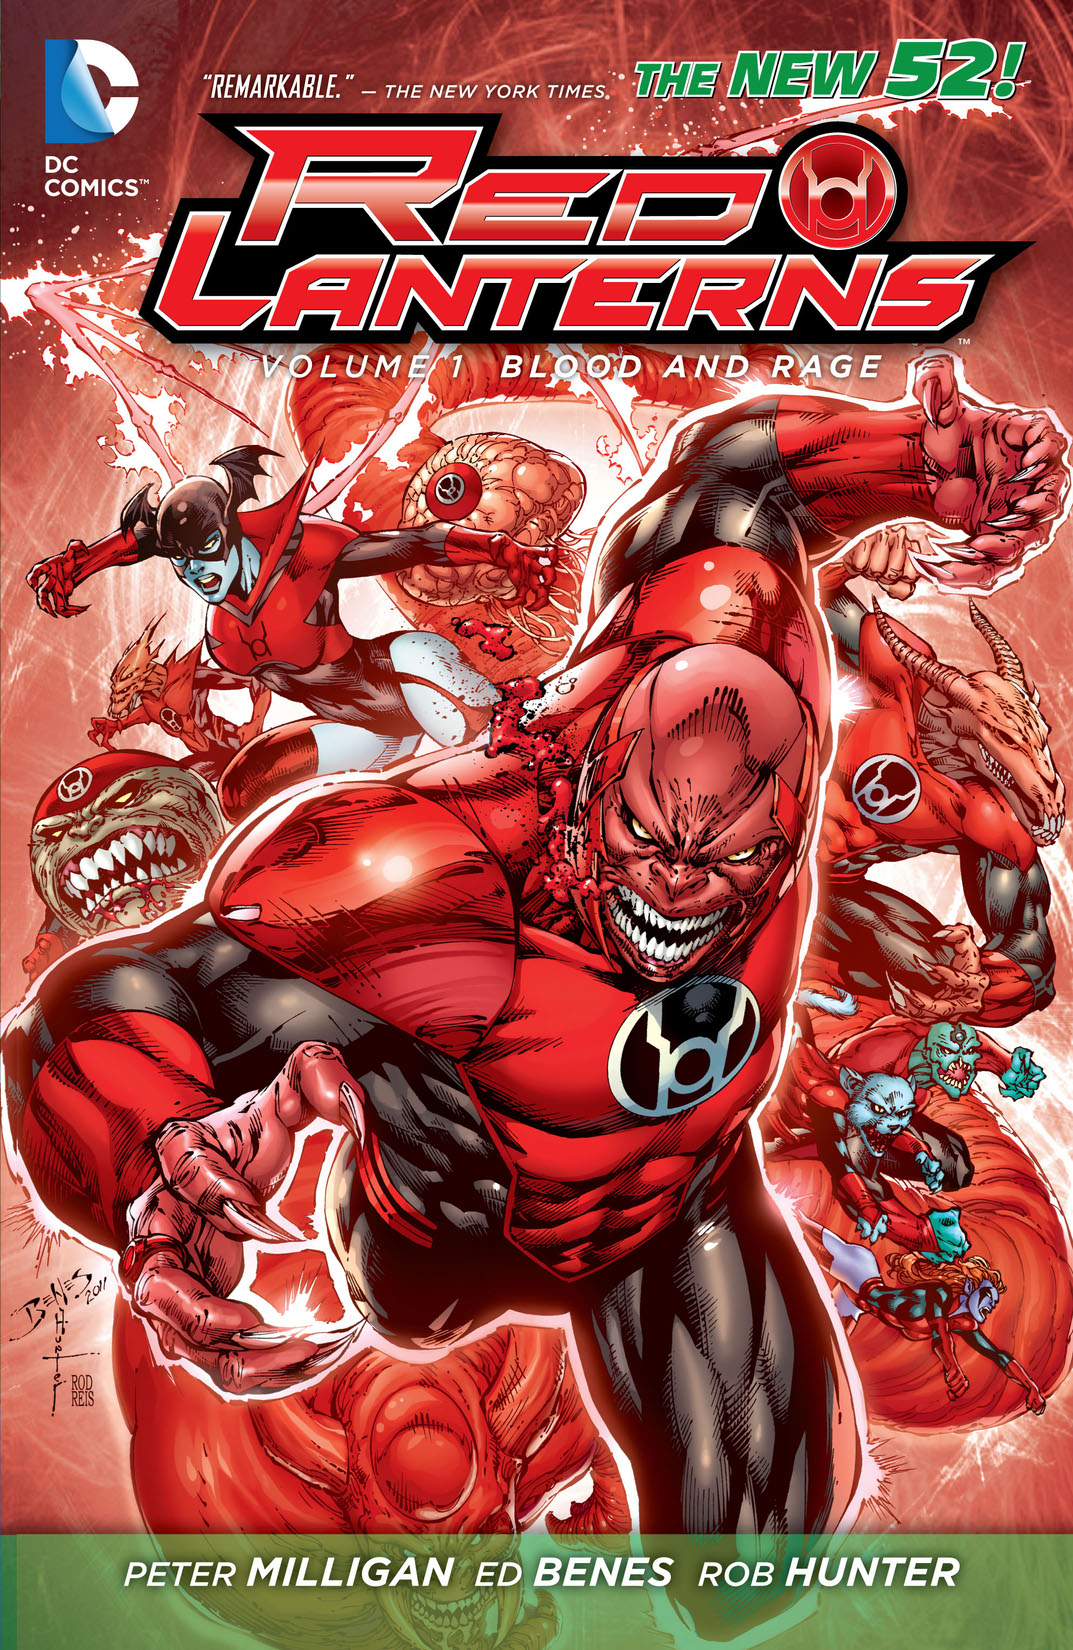 Red Lanterns Vol. 1: Blood and Rage preview images